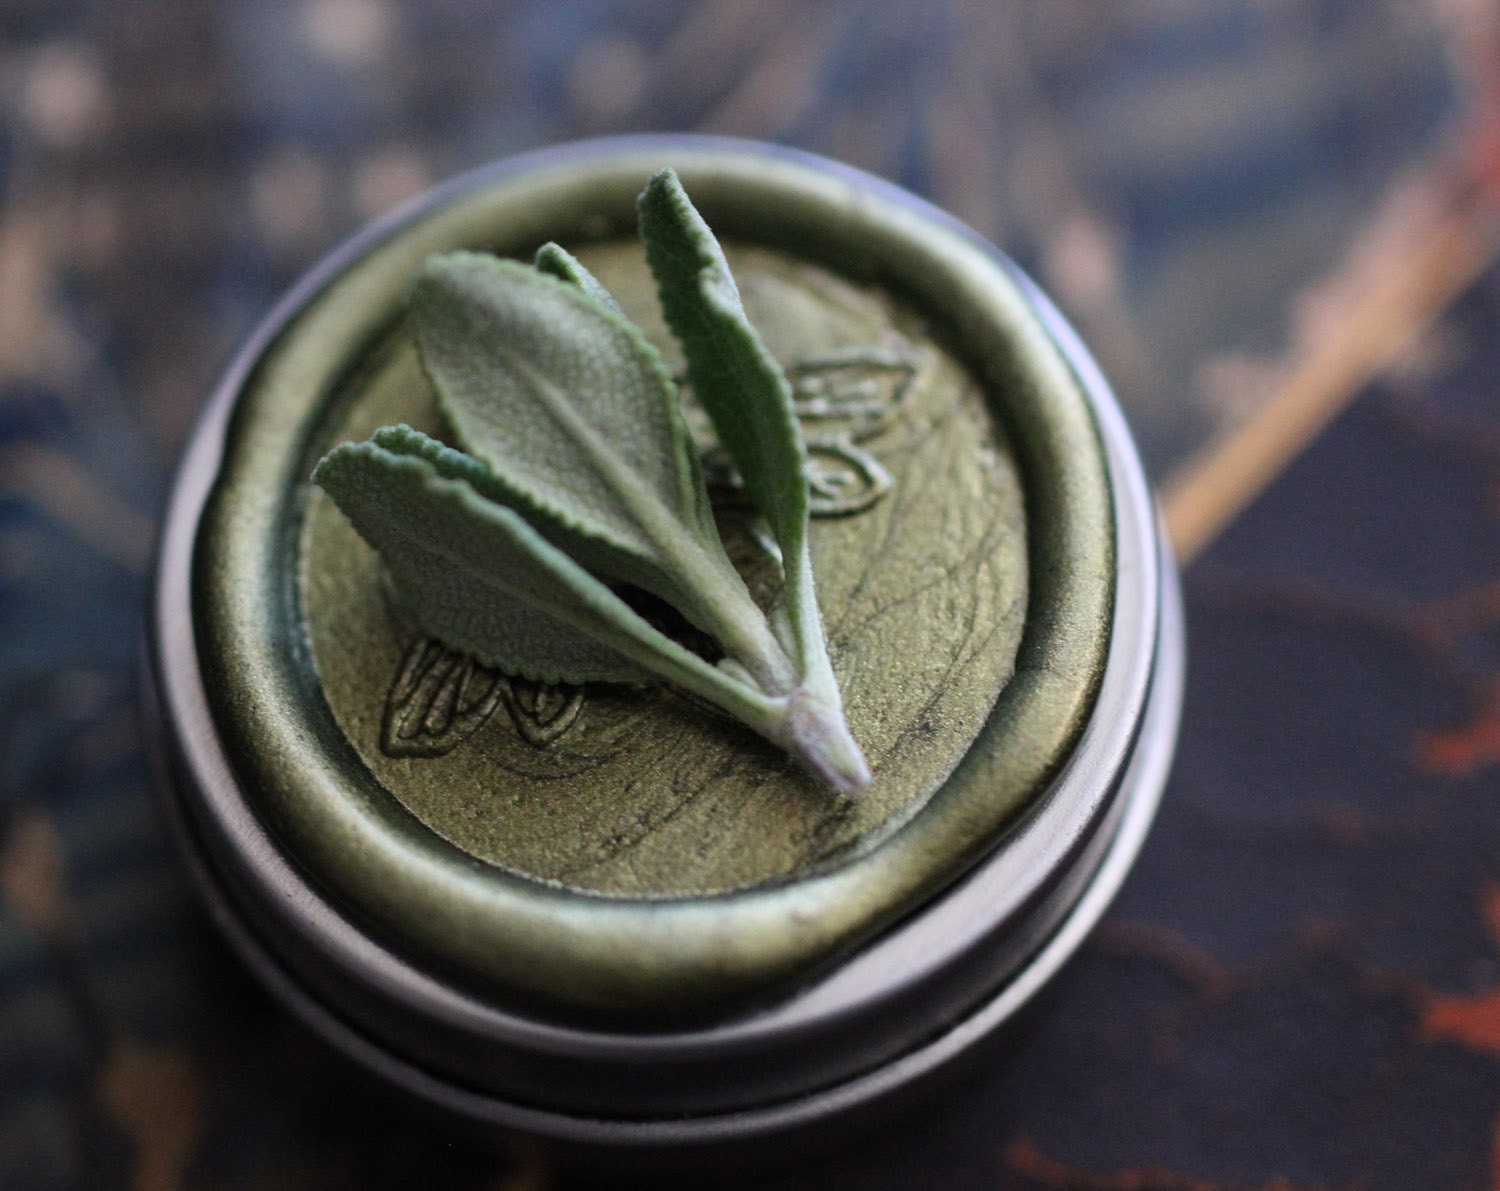 Chaparral natural solid perfume round MAN TIN - For Dad and/or the Naturalist - Cowboy Perfume - California Wild Wood and Sage - IlluminatedPerfume